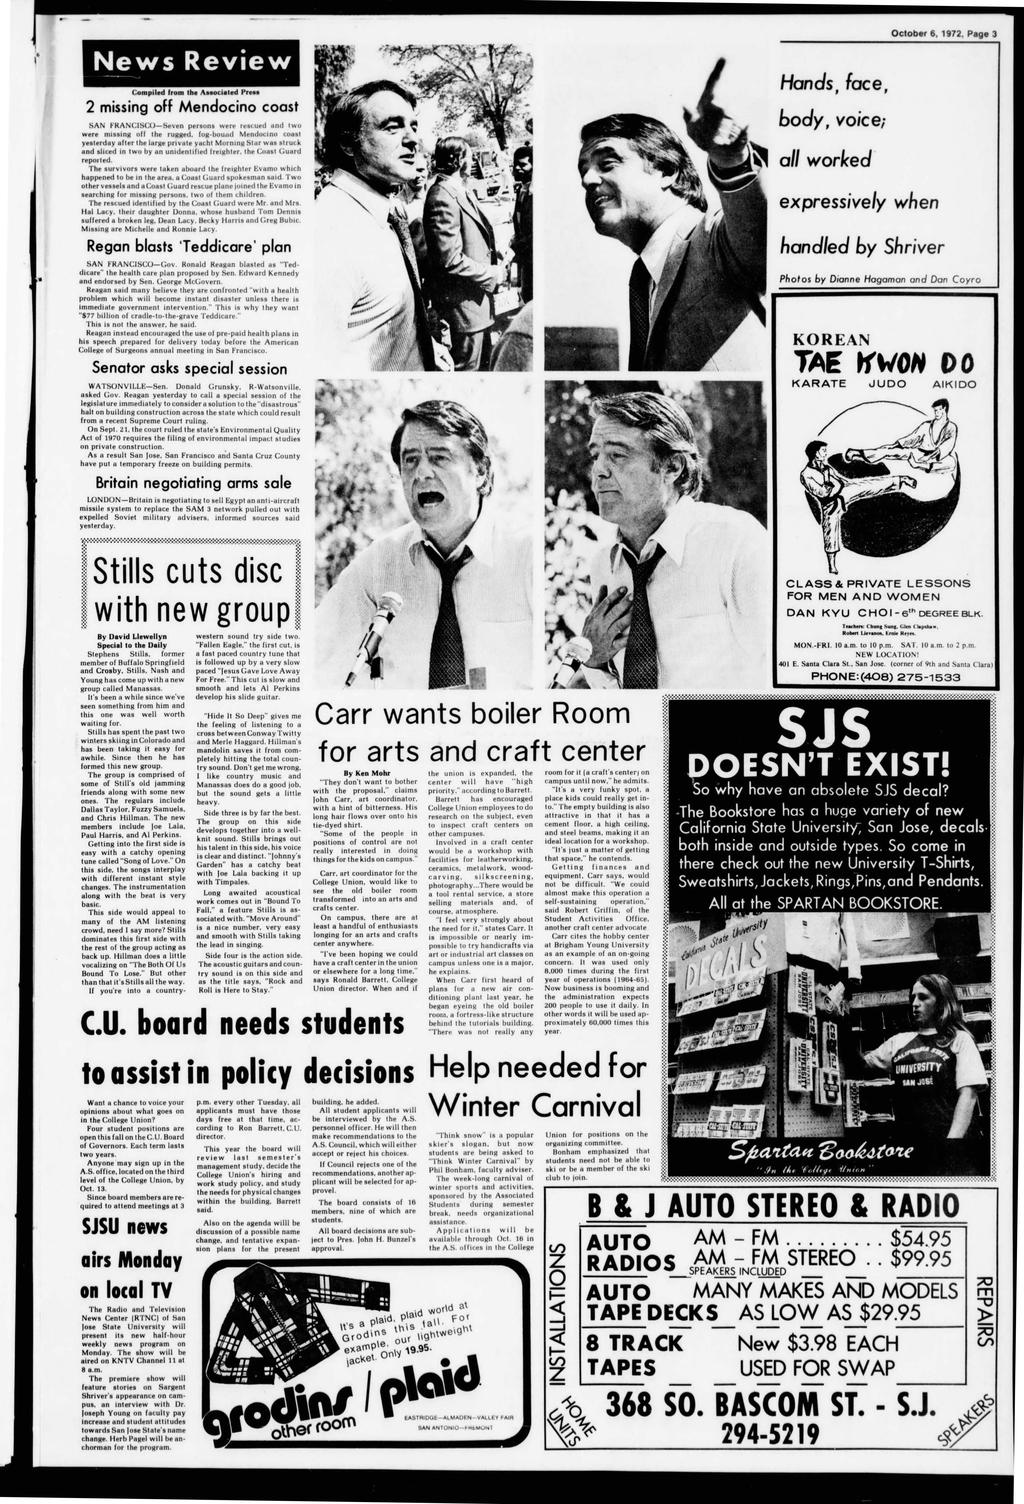 October 6, 1972, Page 3 News Review Hands, face, Compiled Dom Associated Press 2 missing off Mendocino coast body, voice; SAN FRANCISCOSeven persons were rescued and two were missing off rugged.